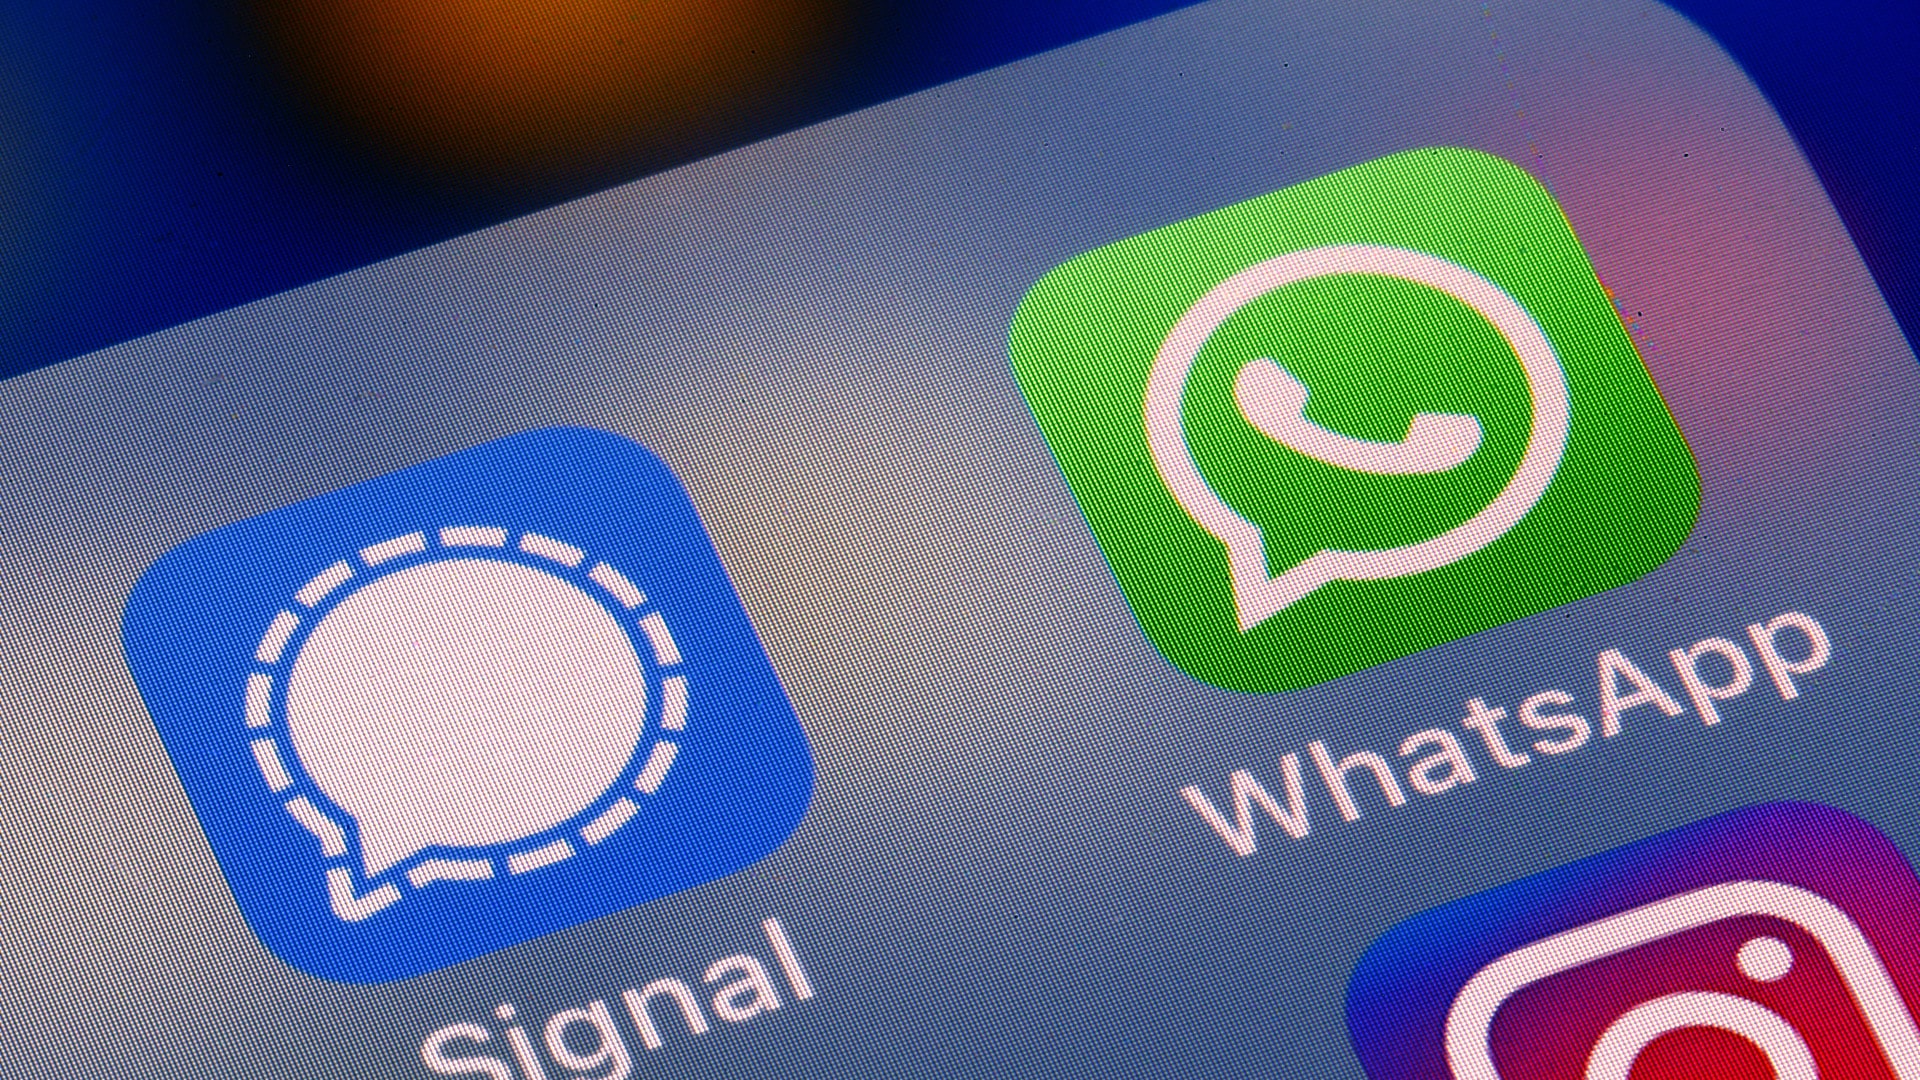 WhatsApp appoints ex-Amazon executive to lead its Payments biz